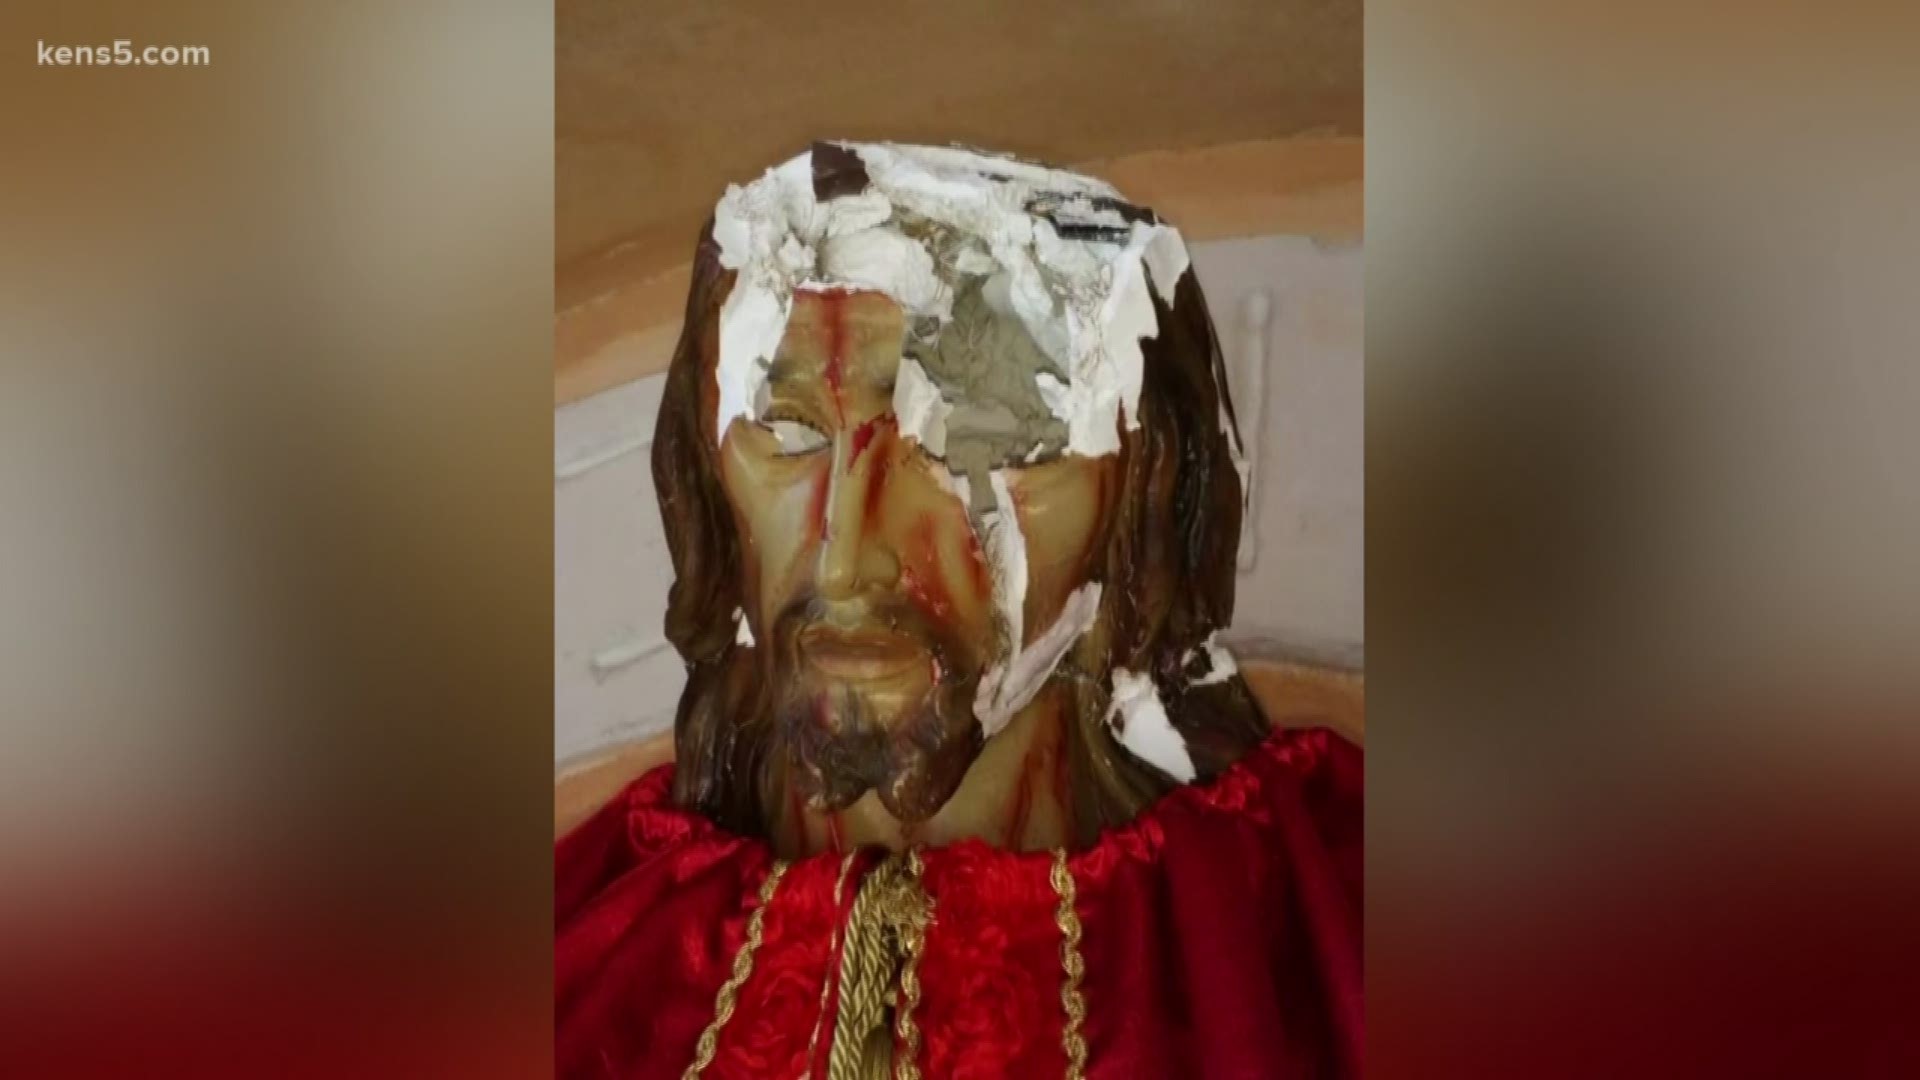 A historic statue of Jesus shattered during Holy Week. The San Antonio church doesn't have a clue who caused the damage, but their prayers are being answered.